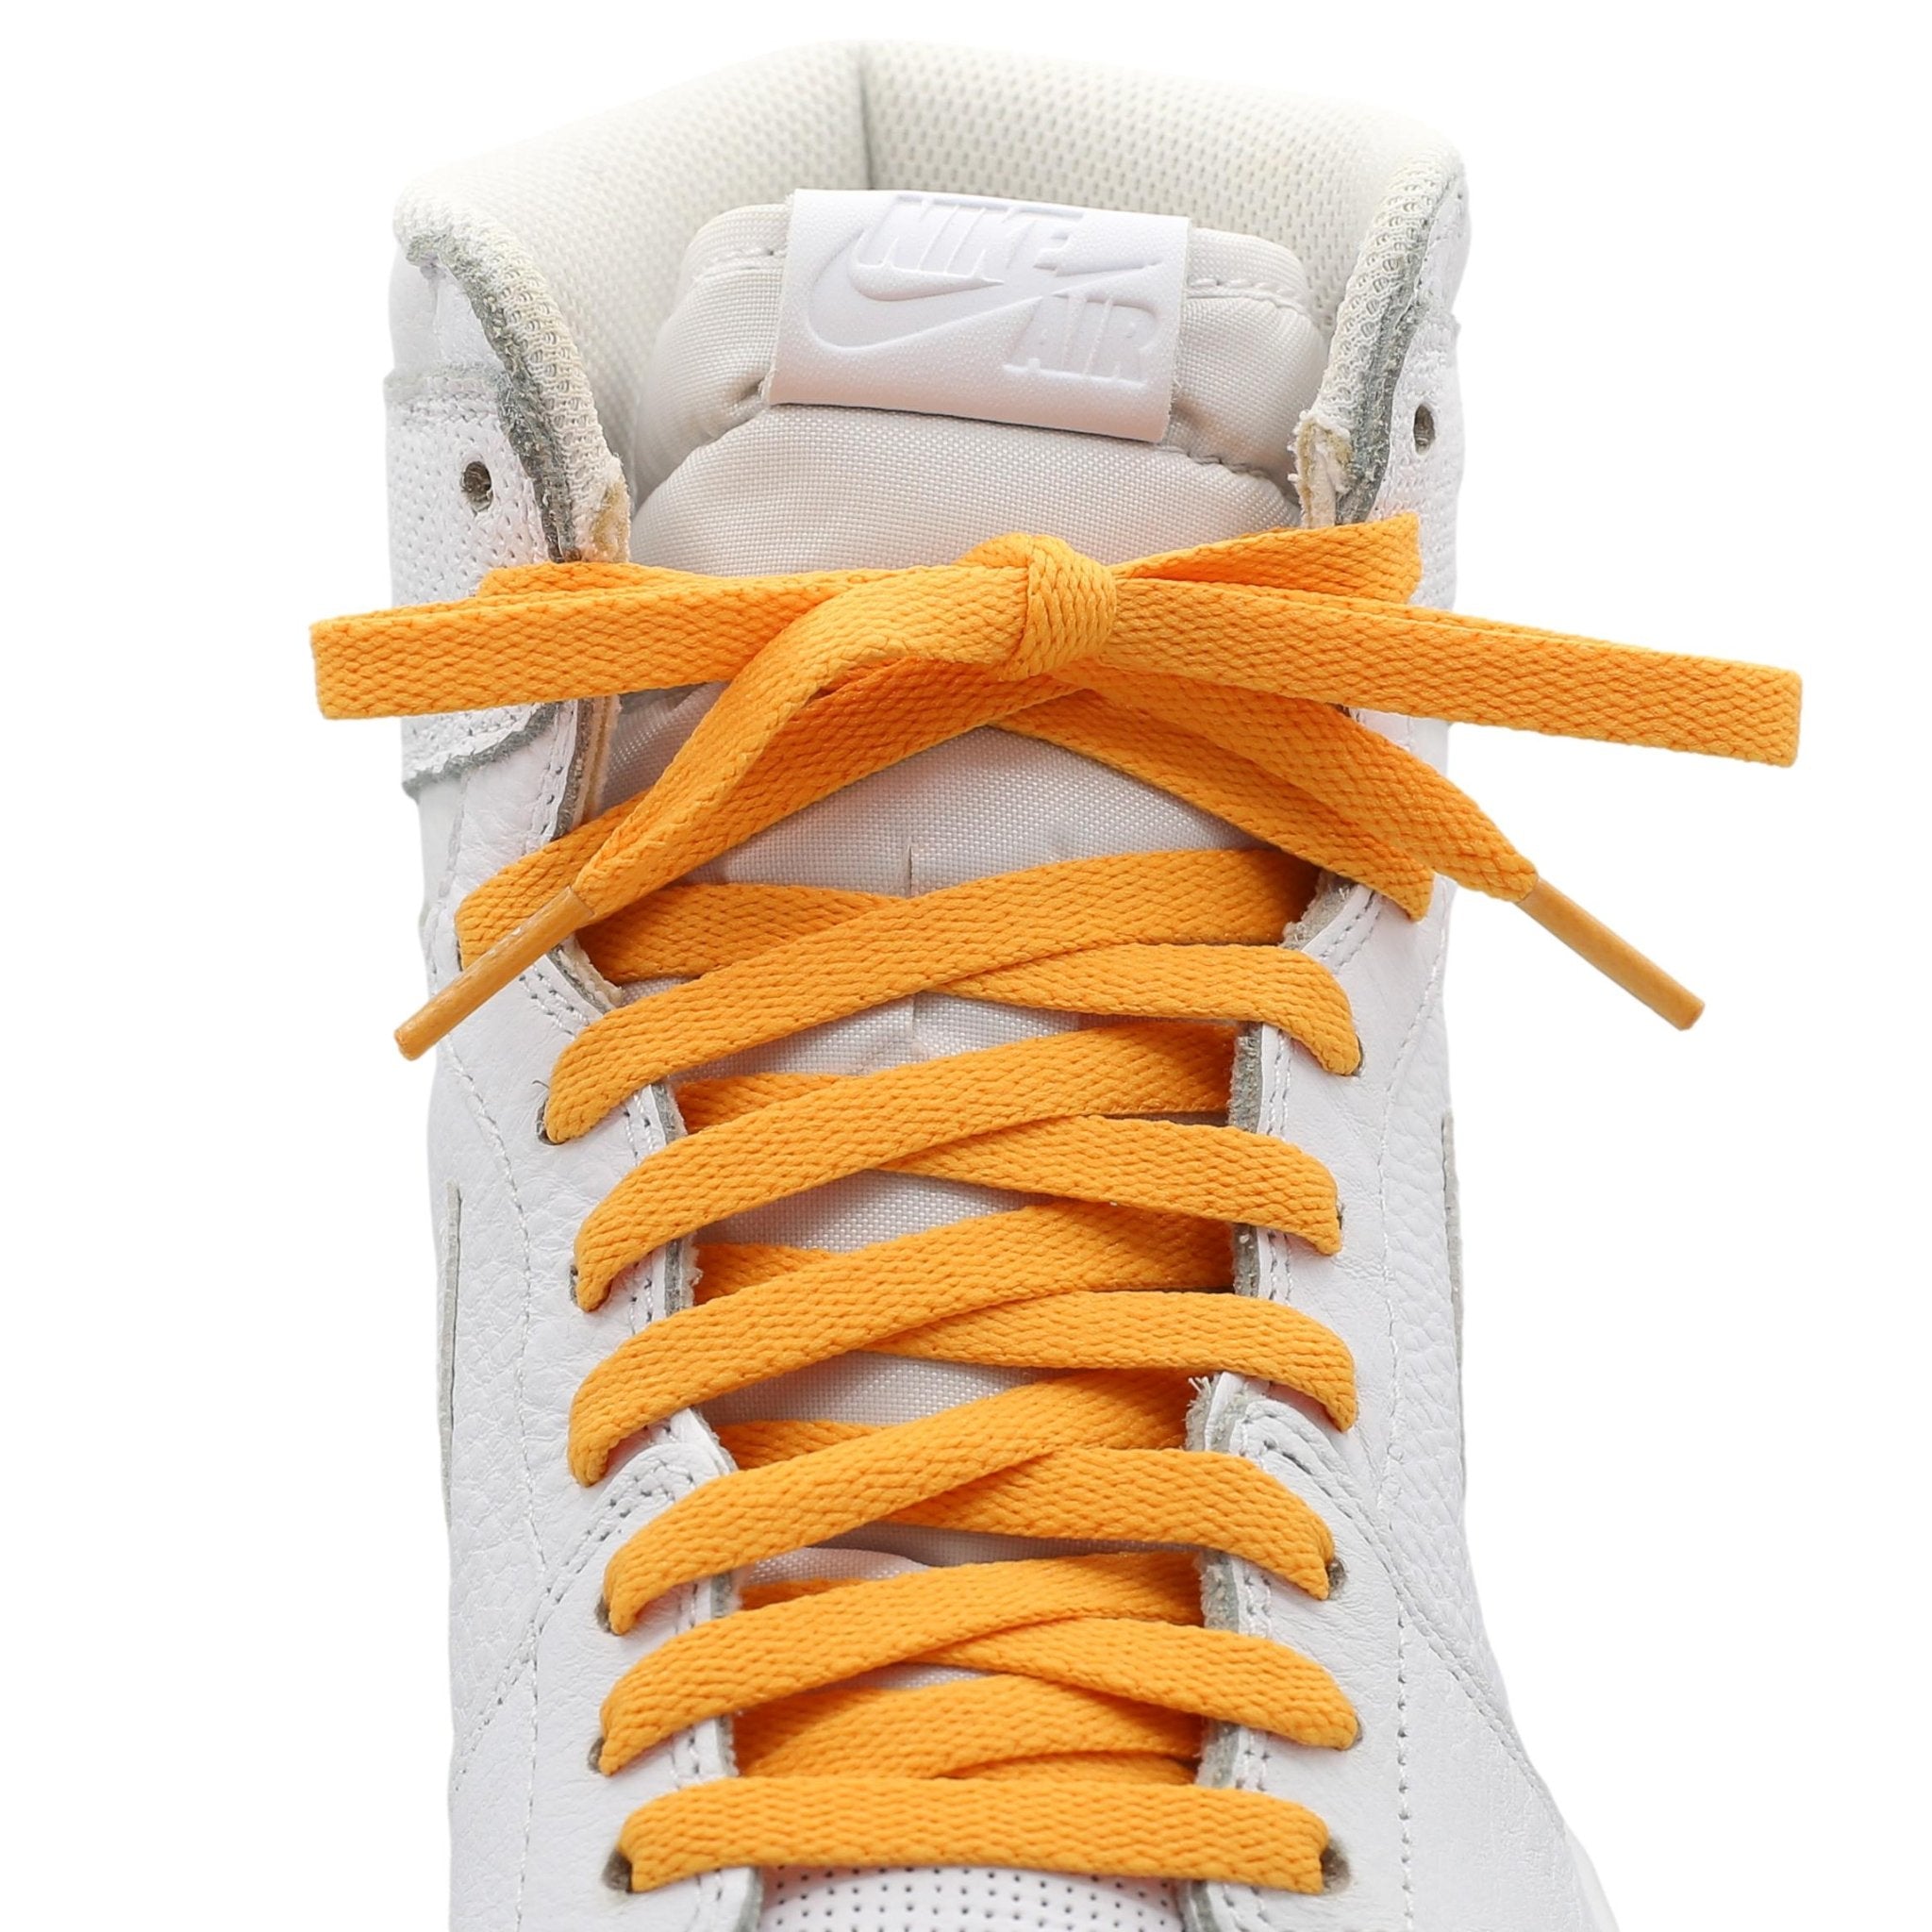 Jordan And Dunk Replacement Shoe Laces - Shoe Lace Supply